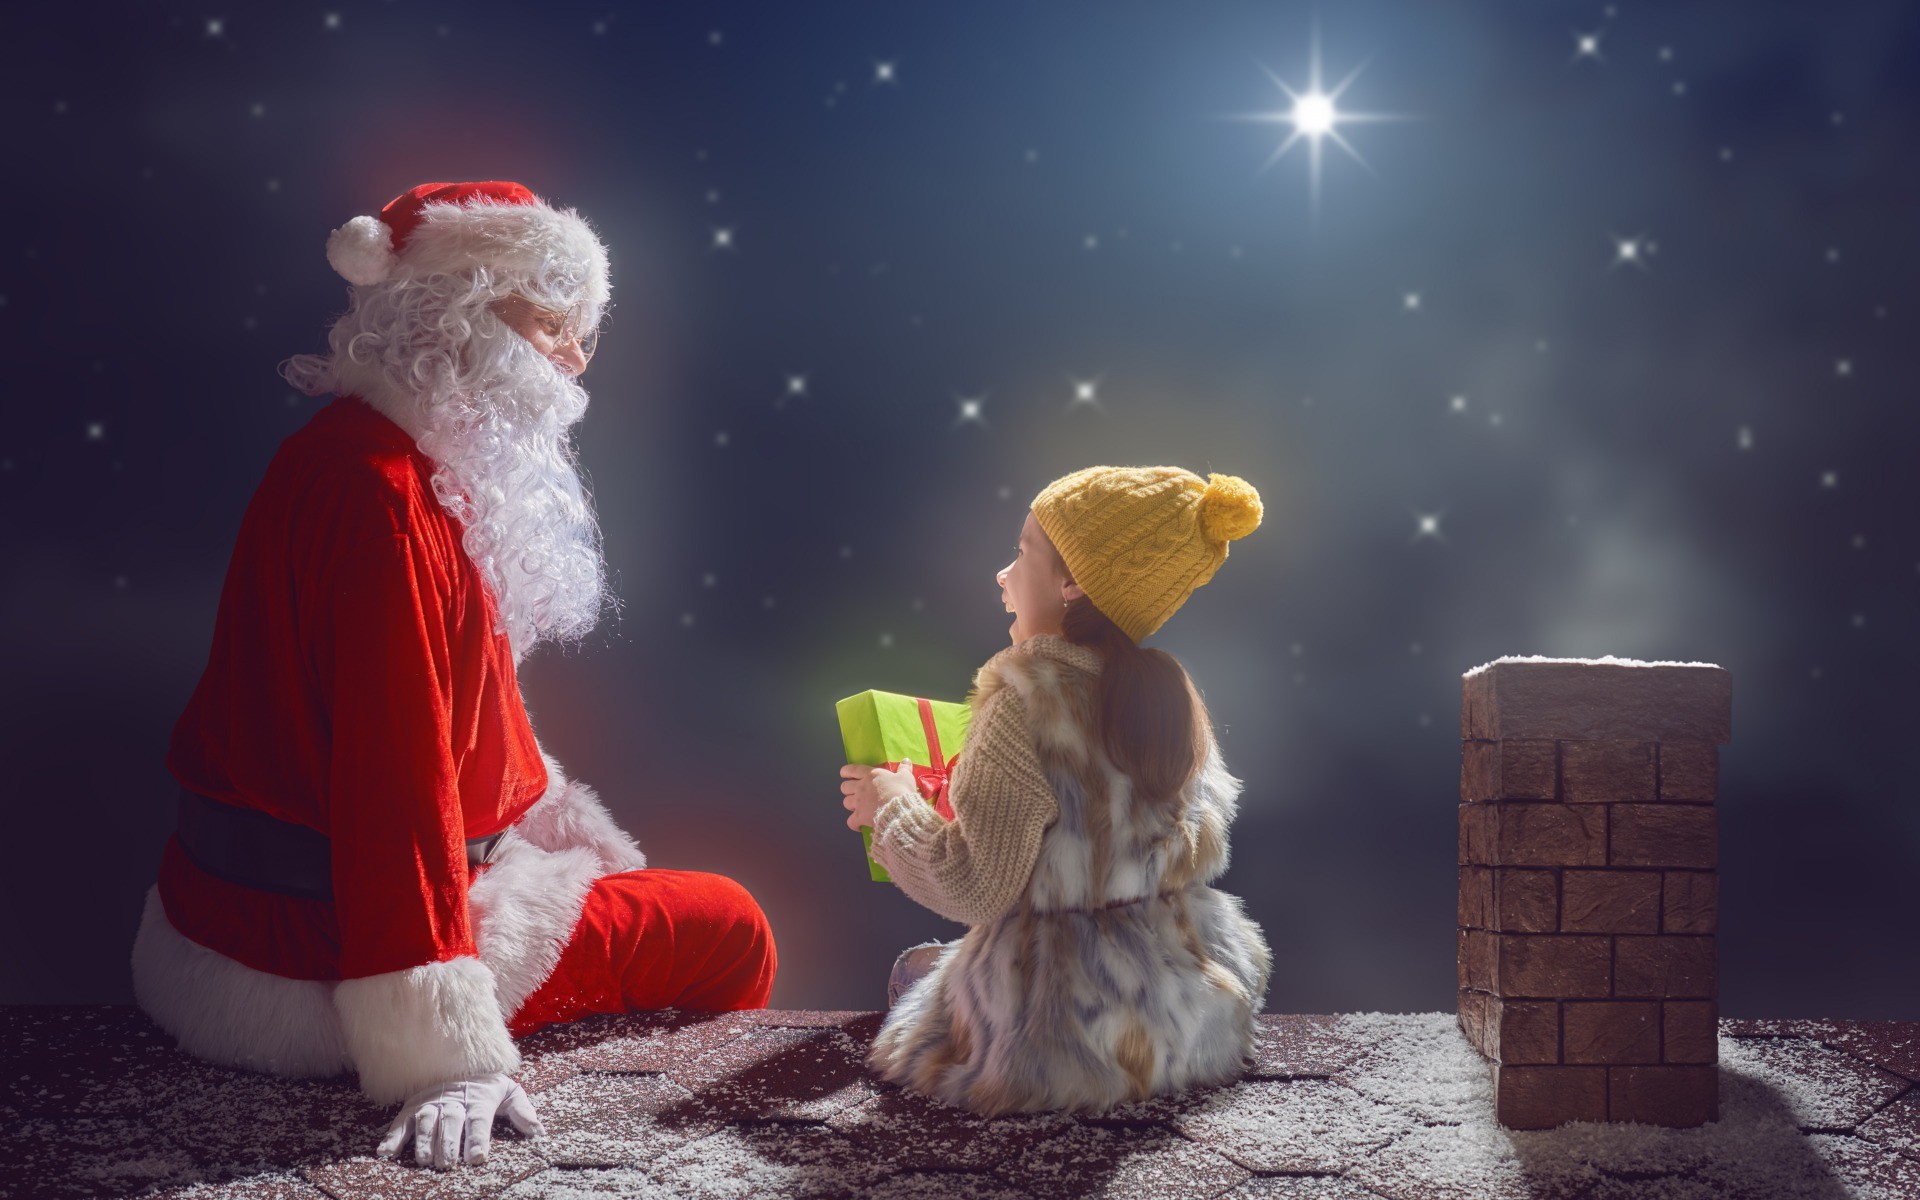 1920x1200 Download wallpaper night, merry christmas, santa claus, New Year,  Christmas, section